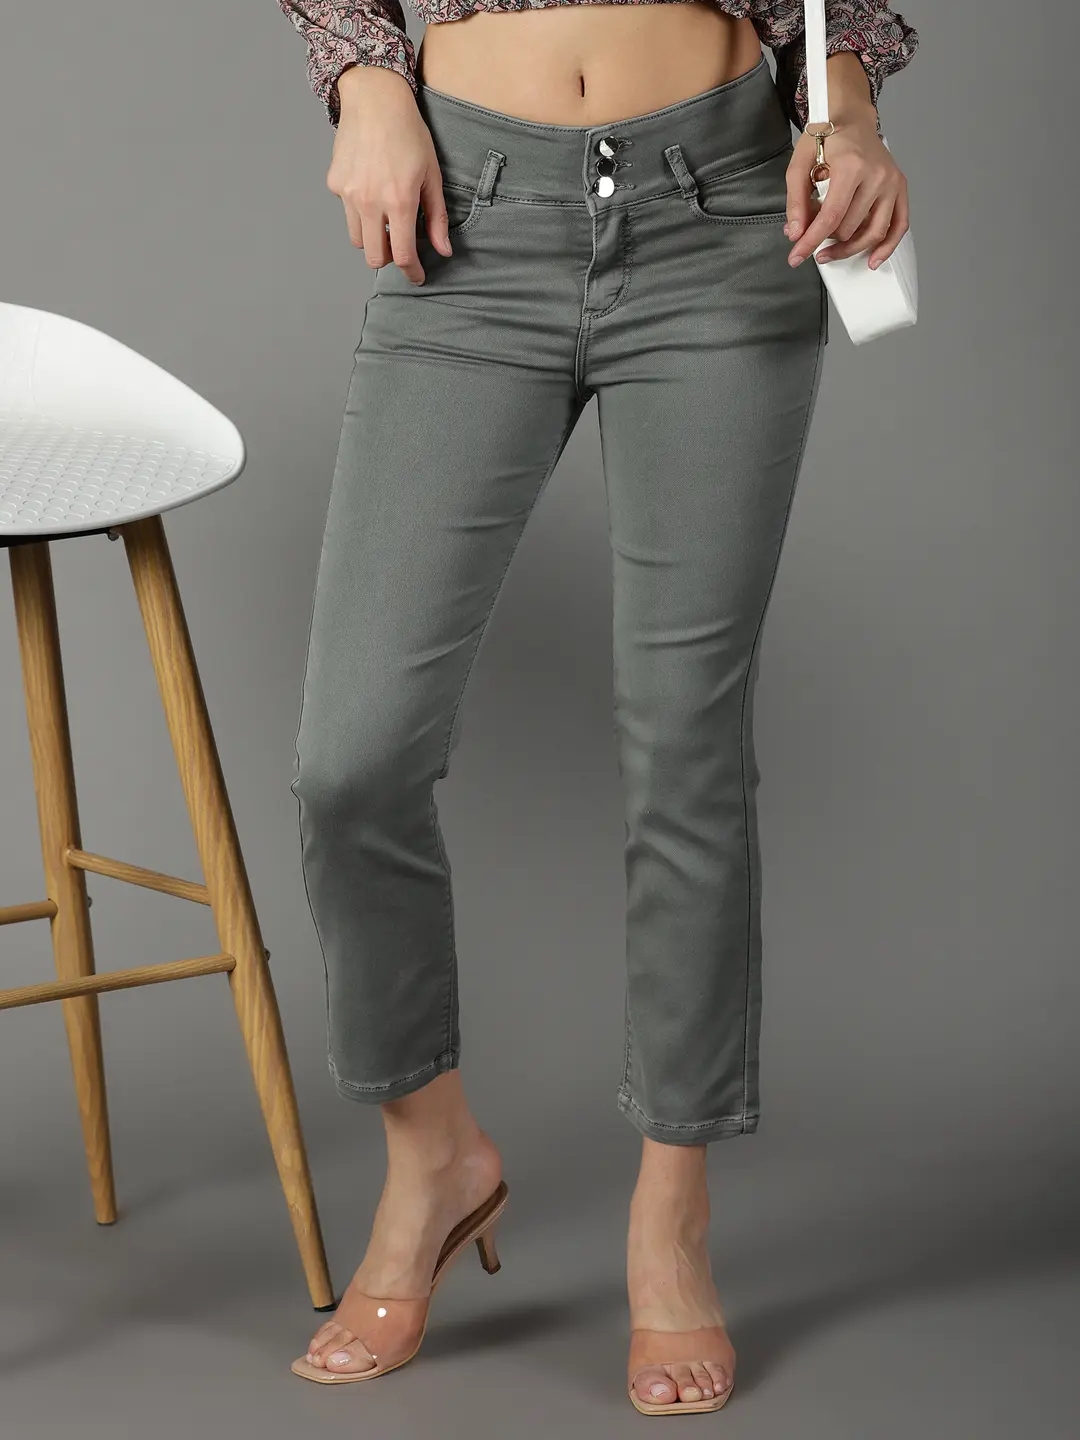 SHOWOFF Women's Stretchable Clean Look Grey Regular Fit Jeans